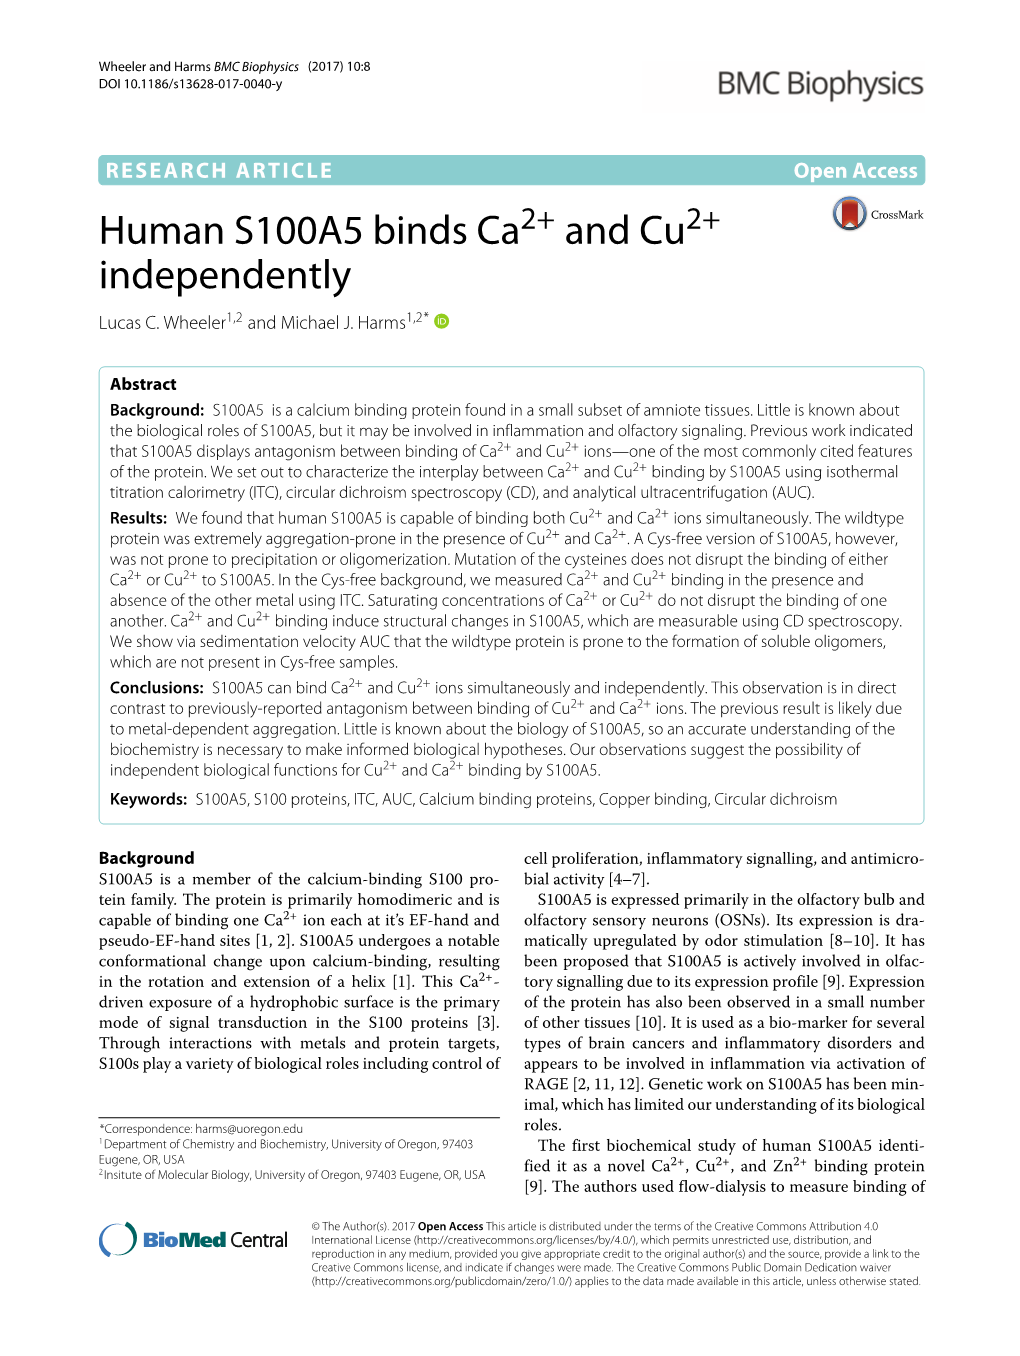 Human S100A5 Binds Ca^{2+} and Cu^{2+} Independently